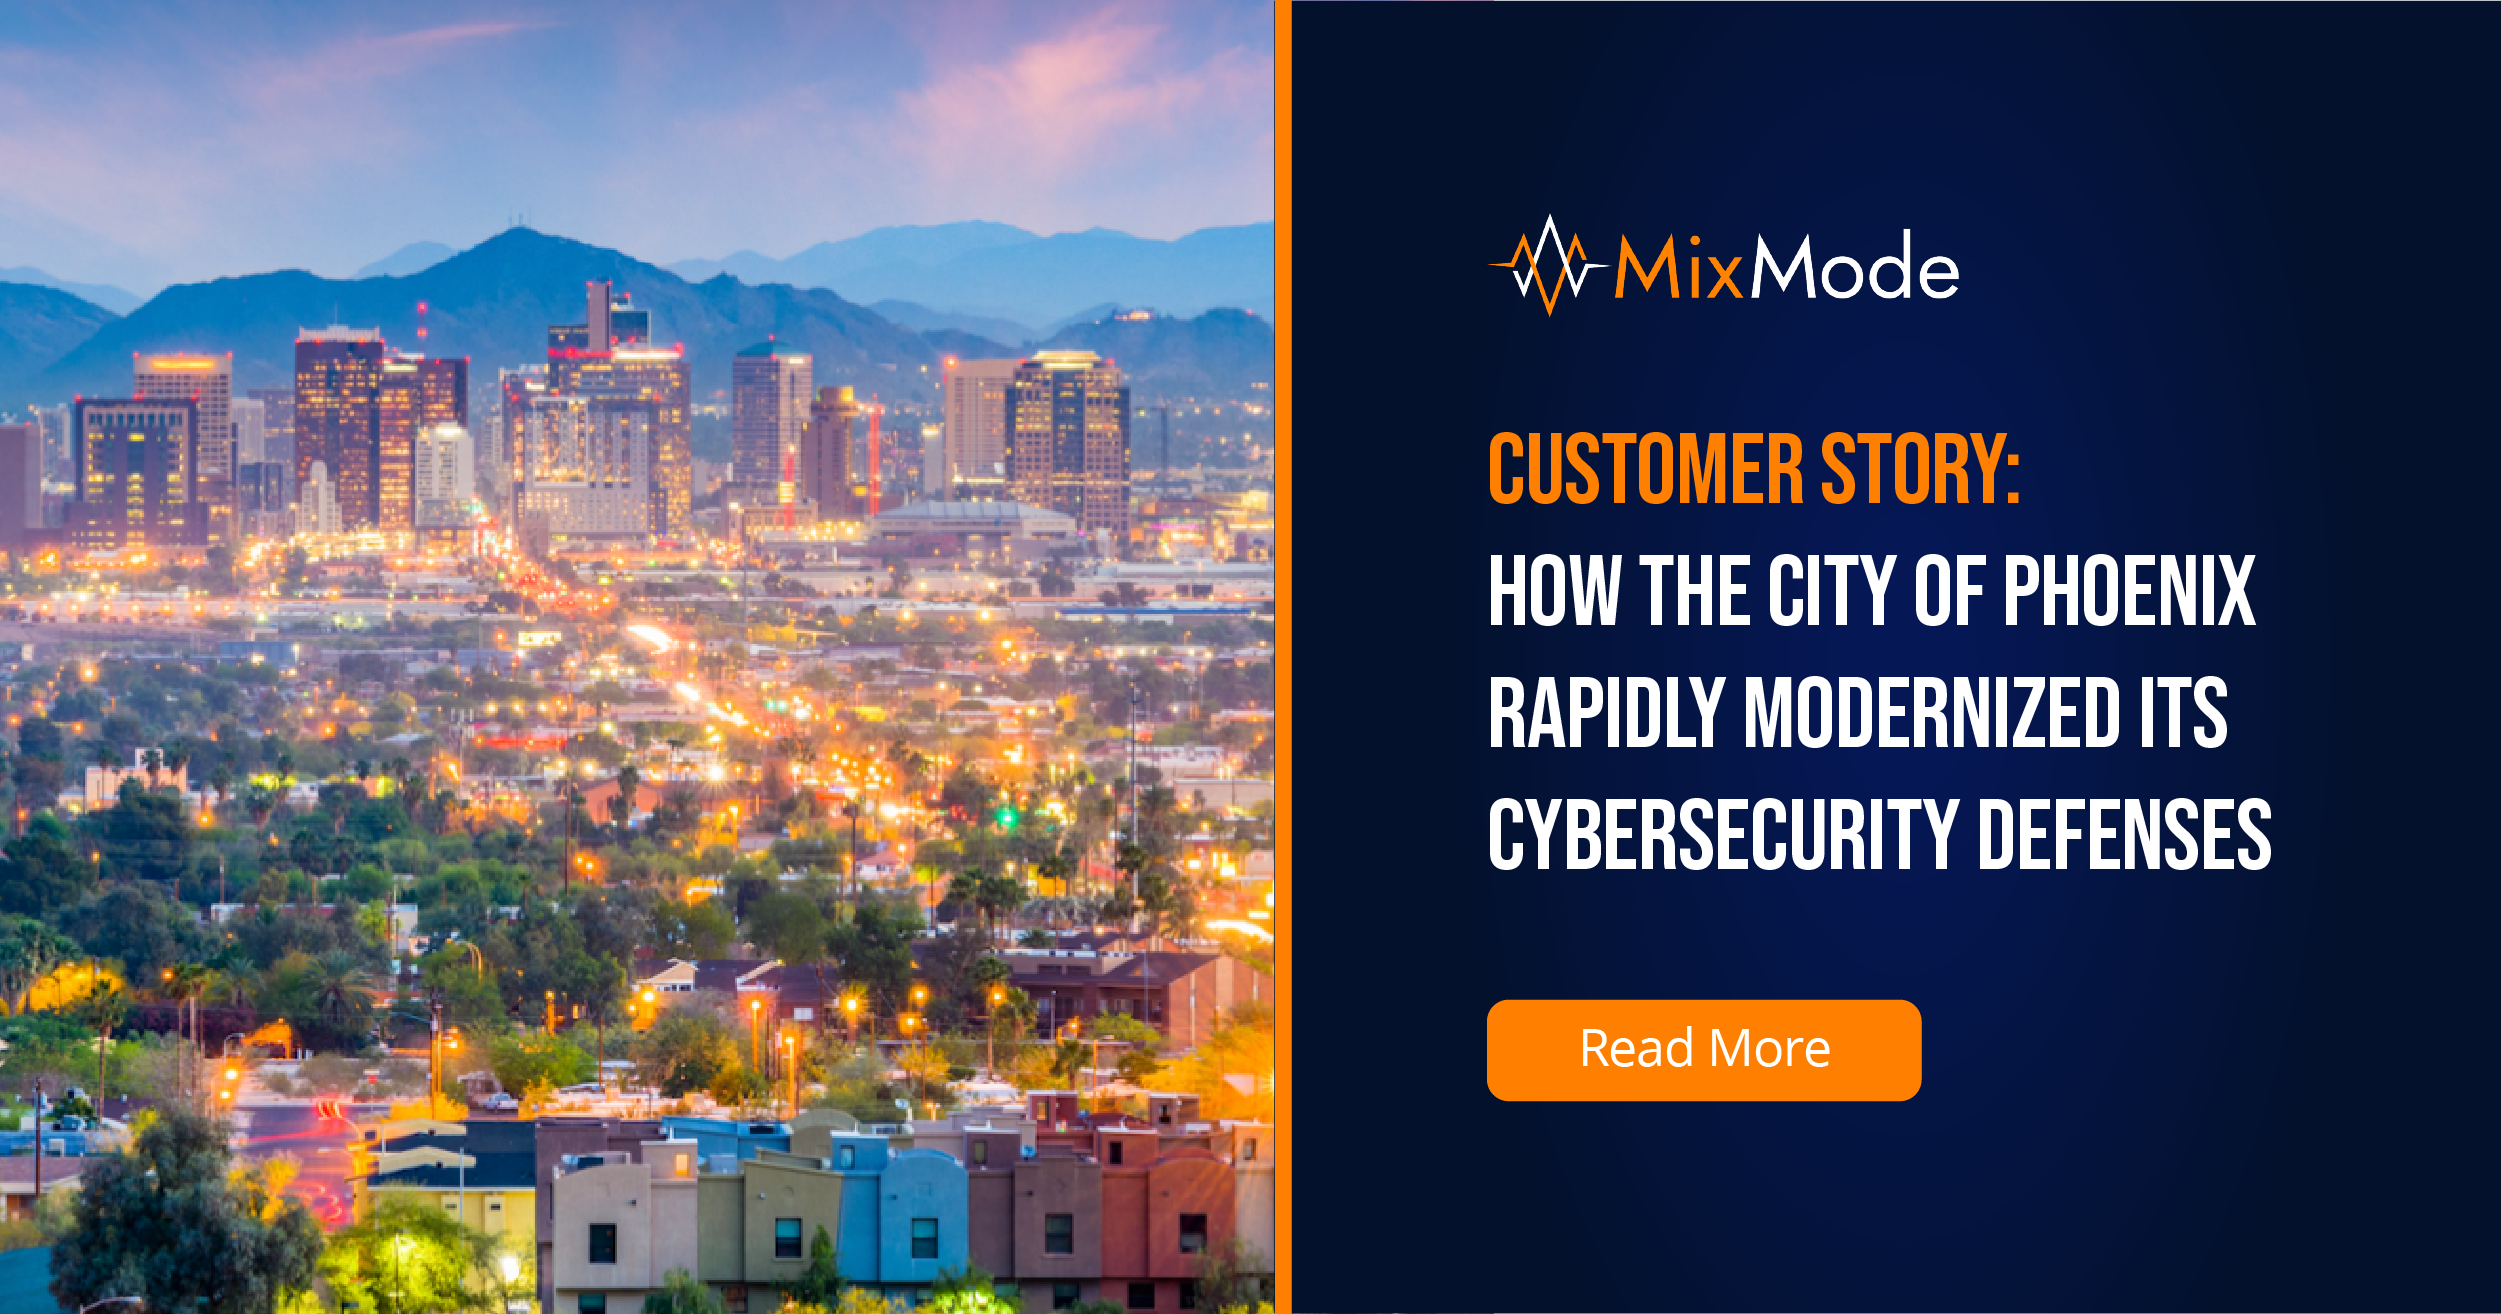 MixMode - Customer Story - How the City of Phoenix Rapidly Modernized its Cybersecurity Defenses